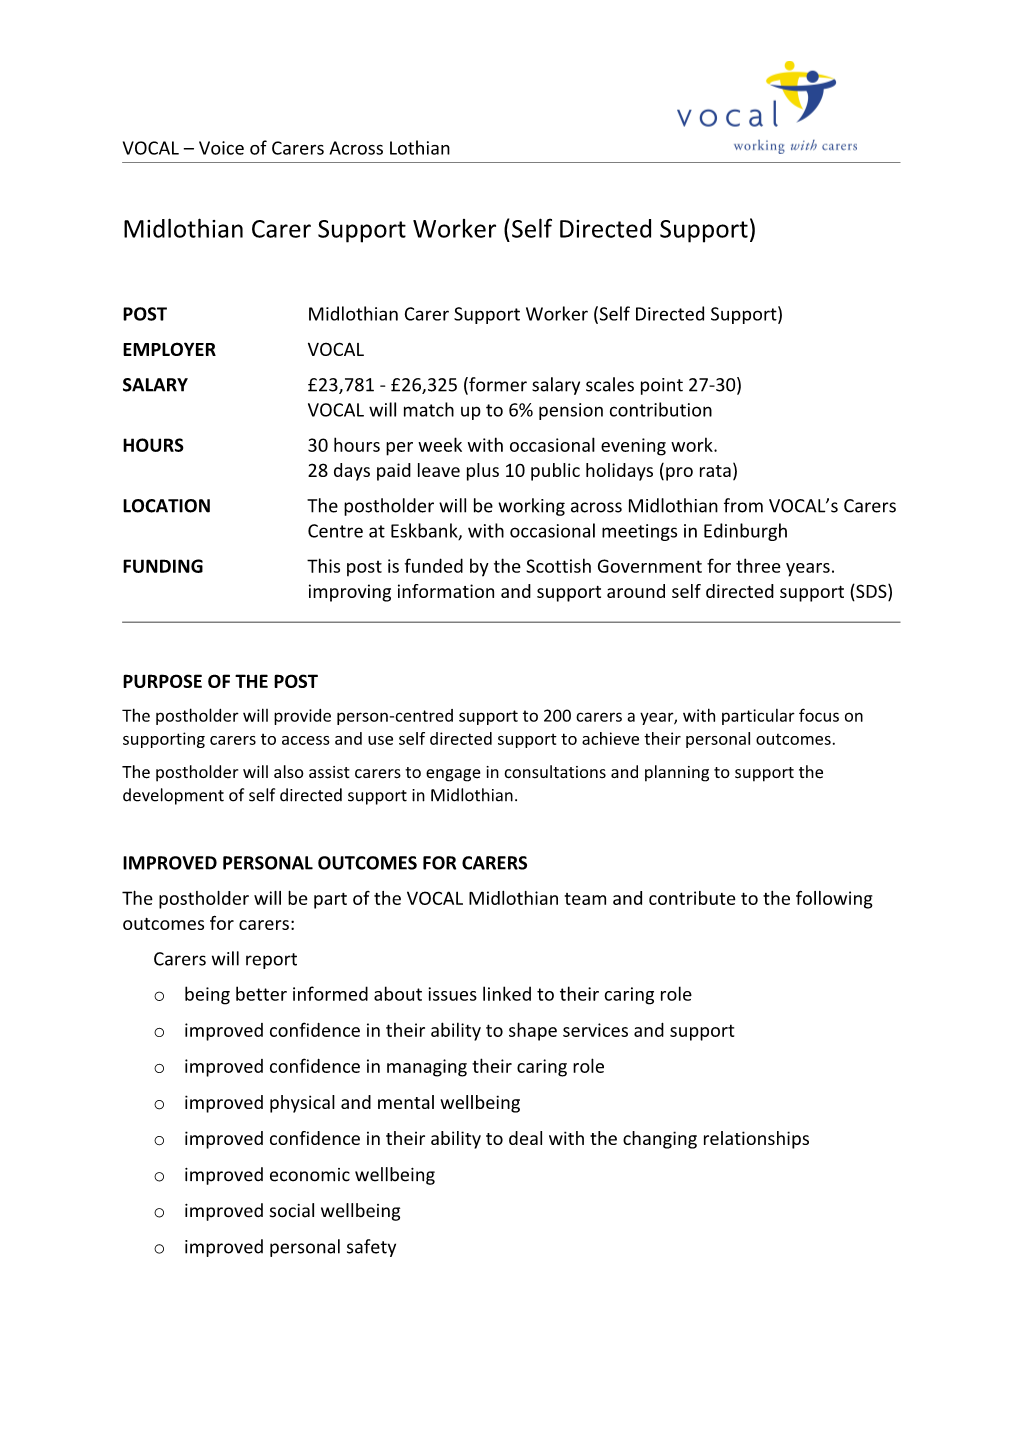 Midlothian Carer Support Worker (Self Directed Support)